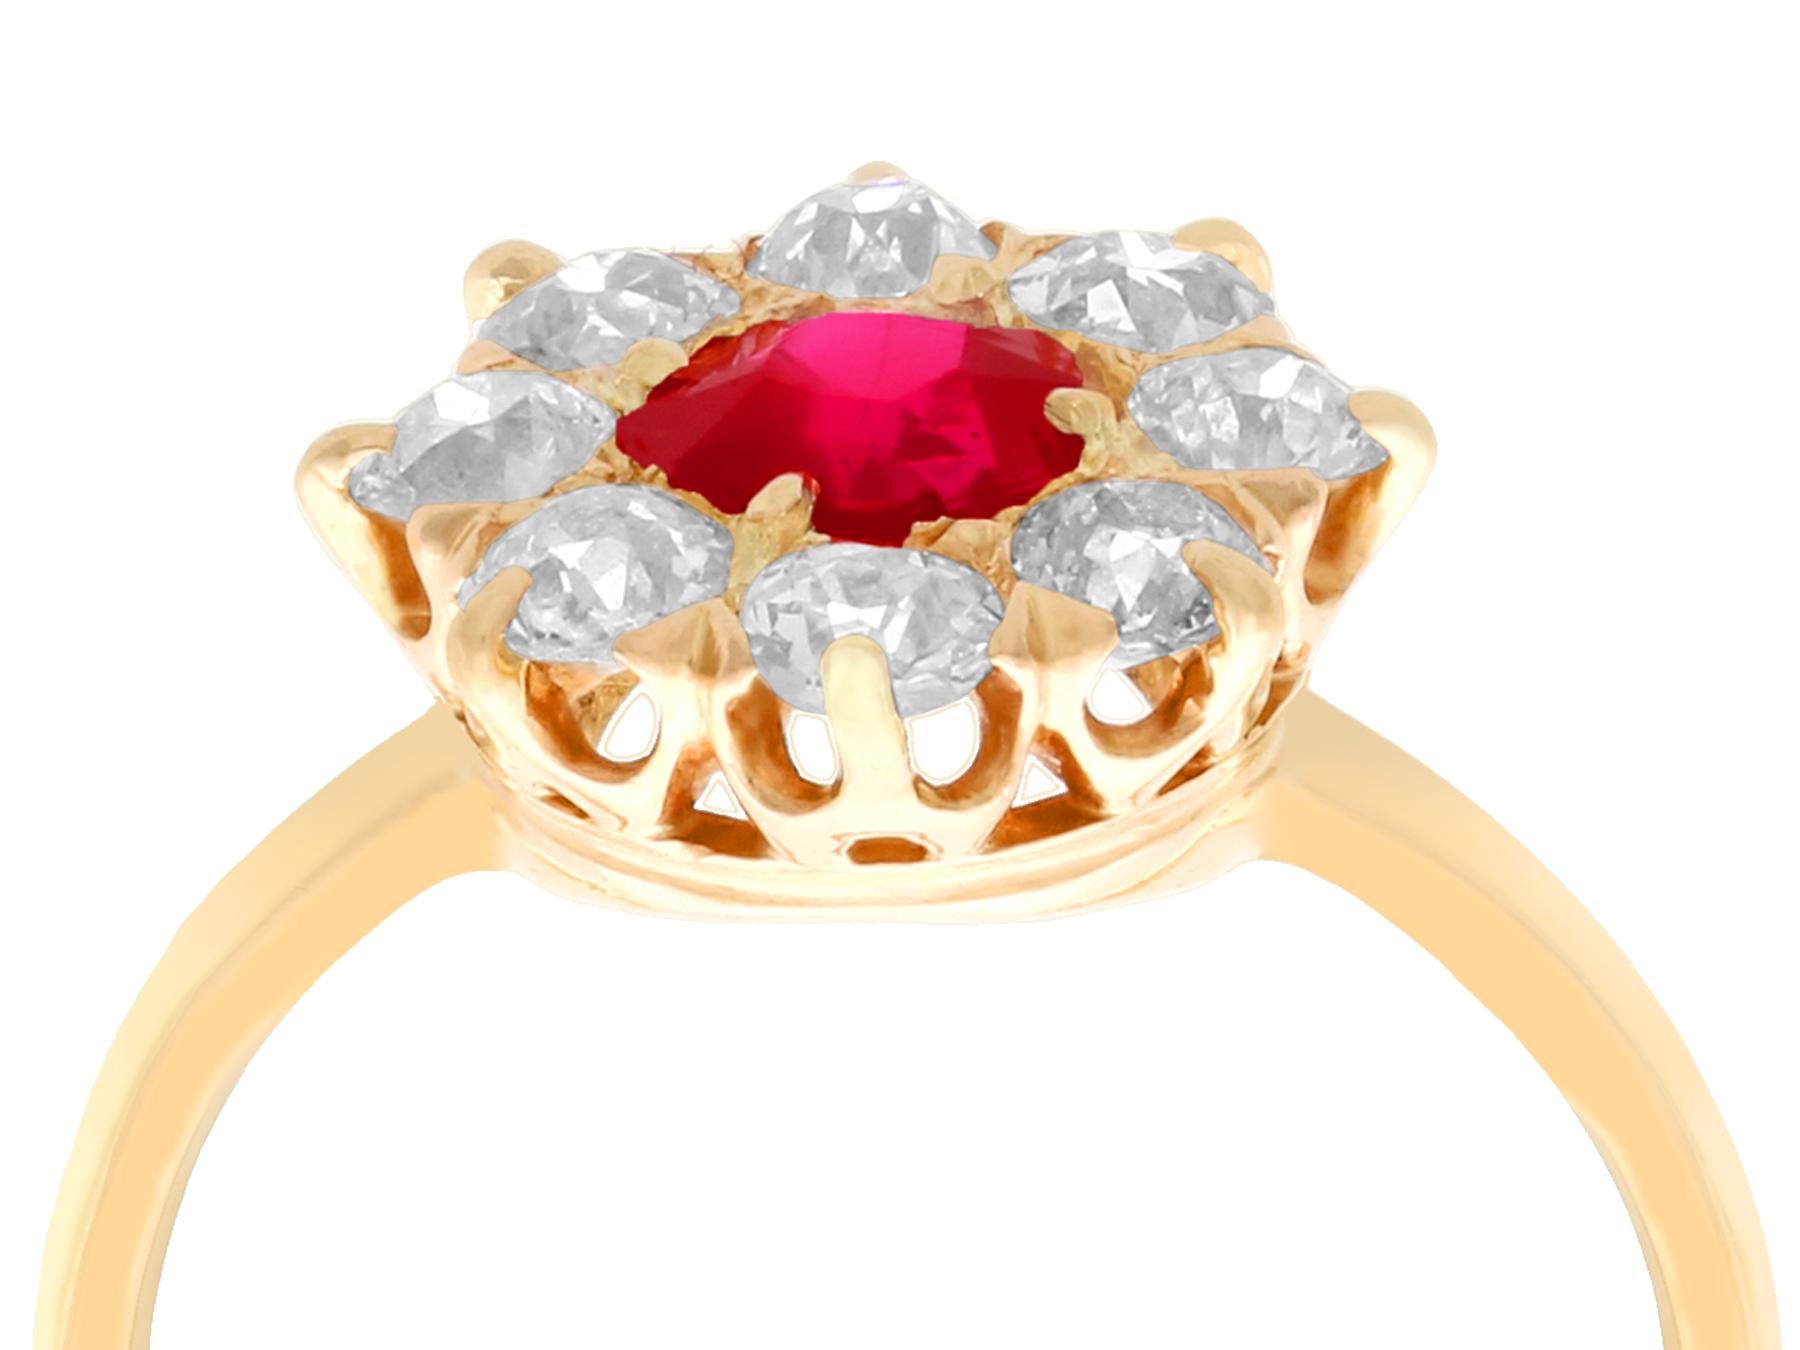 An impressive antique 0.63 carat ruby and 0.60 carat diamond, 18 karat yellow gold cluster ring; part of our diverse antique jewelry collections.

This fine and impressive antique ruby cluster ring has been crafted in 18k yellow gold.

The pierced